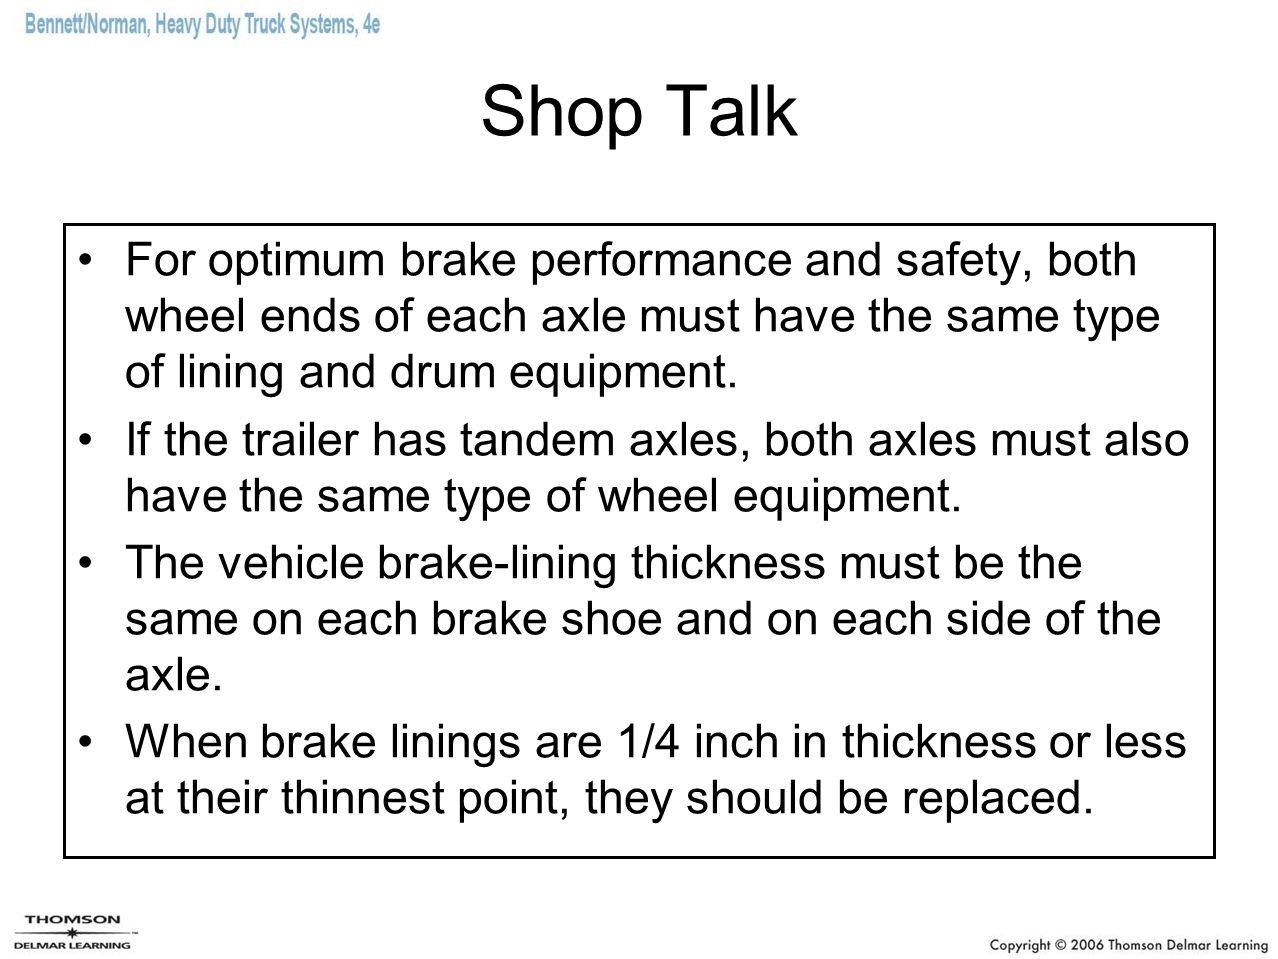 Shop Talk For optimum brake performance and safety, both wheel ends of each axle must have the same type of lining and drum equipment.